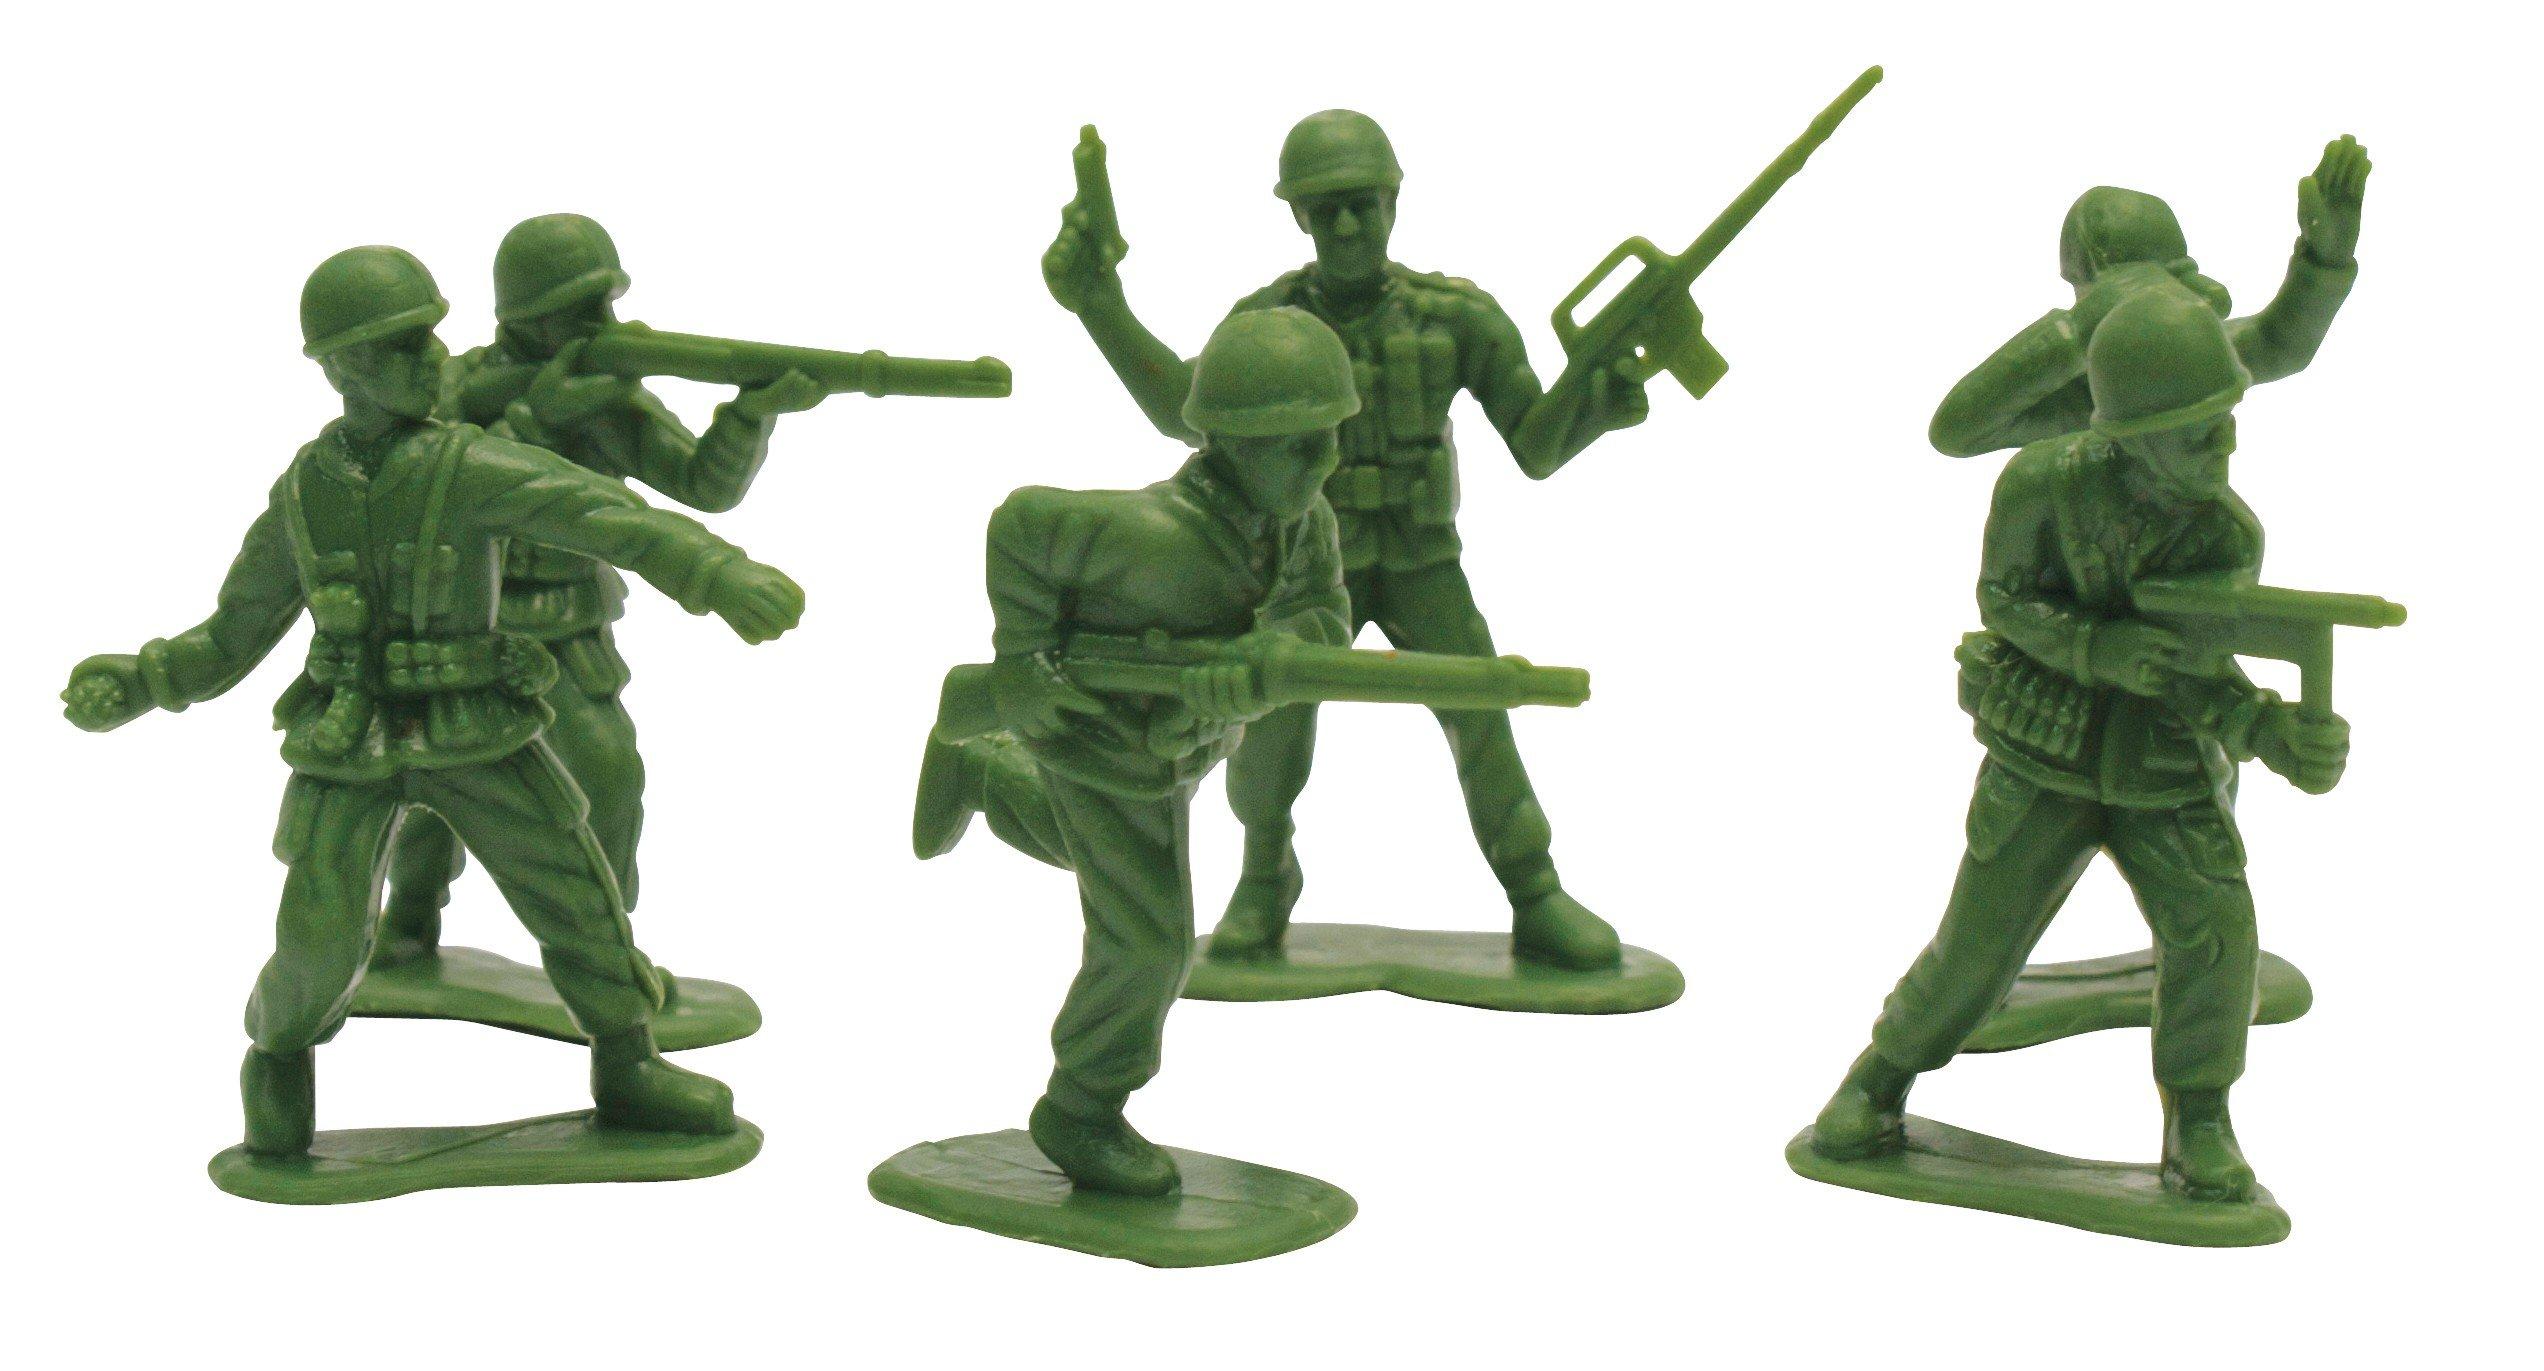 Free photo: Toy Soldiers Army, Toys, Toy